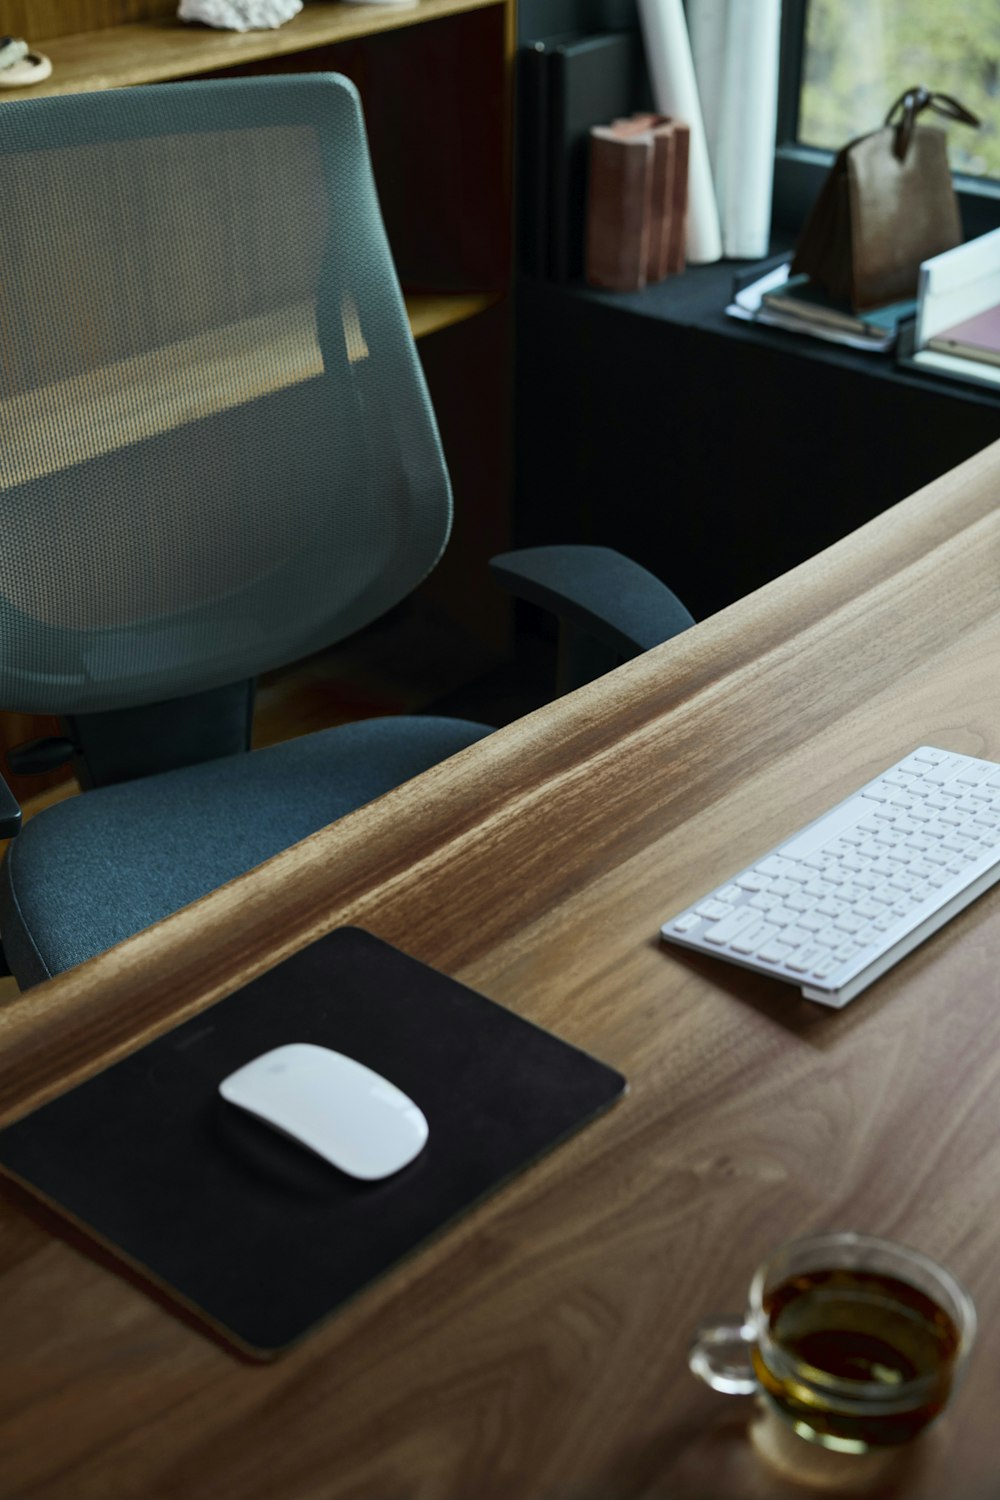 a desk with a computer mouse, keyboard and a mouse pad